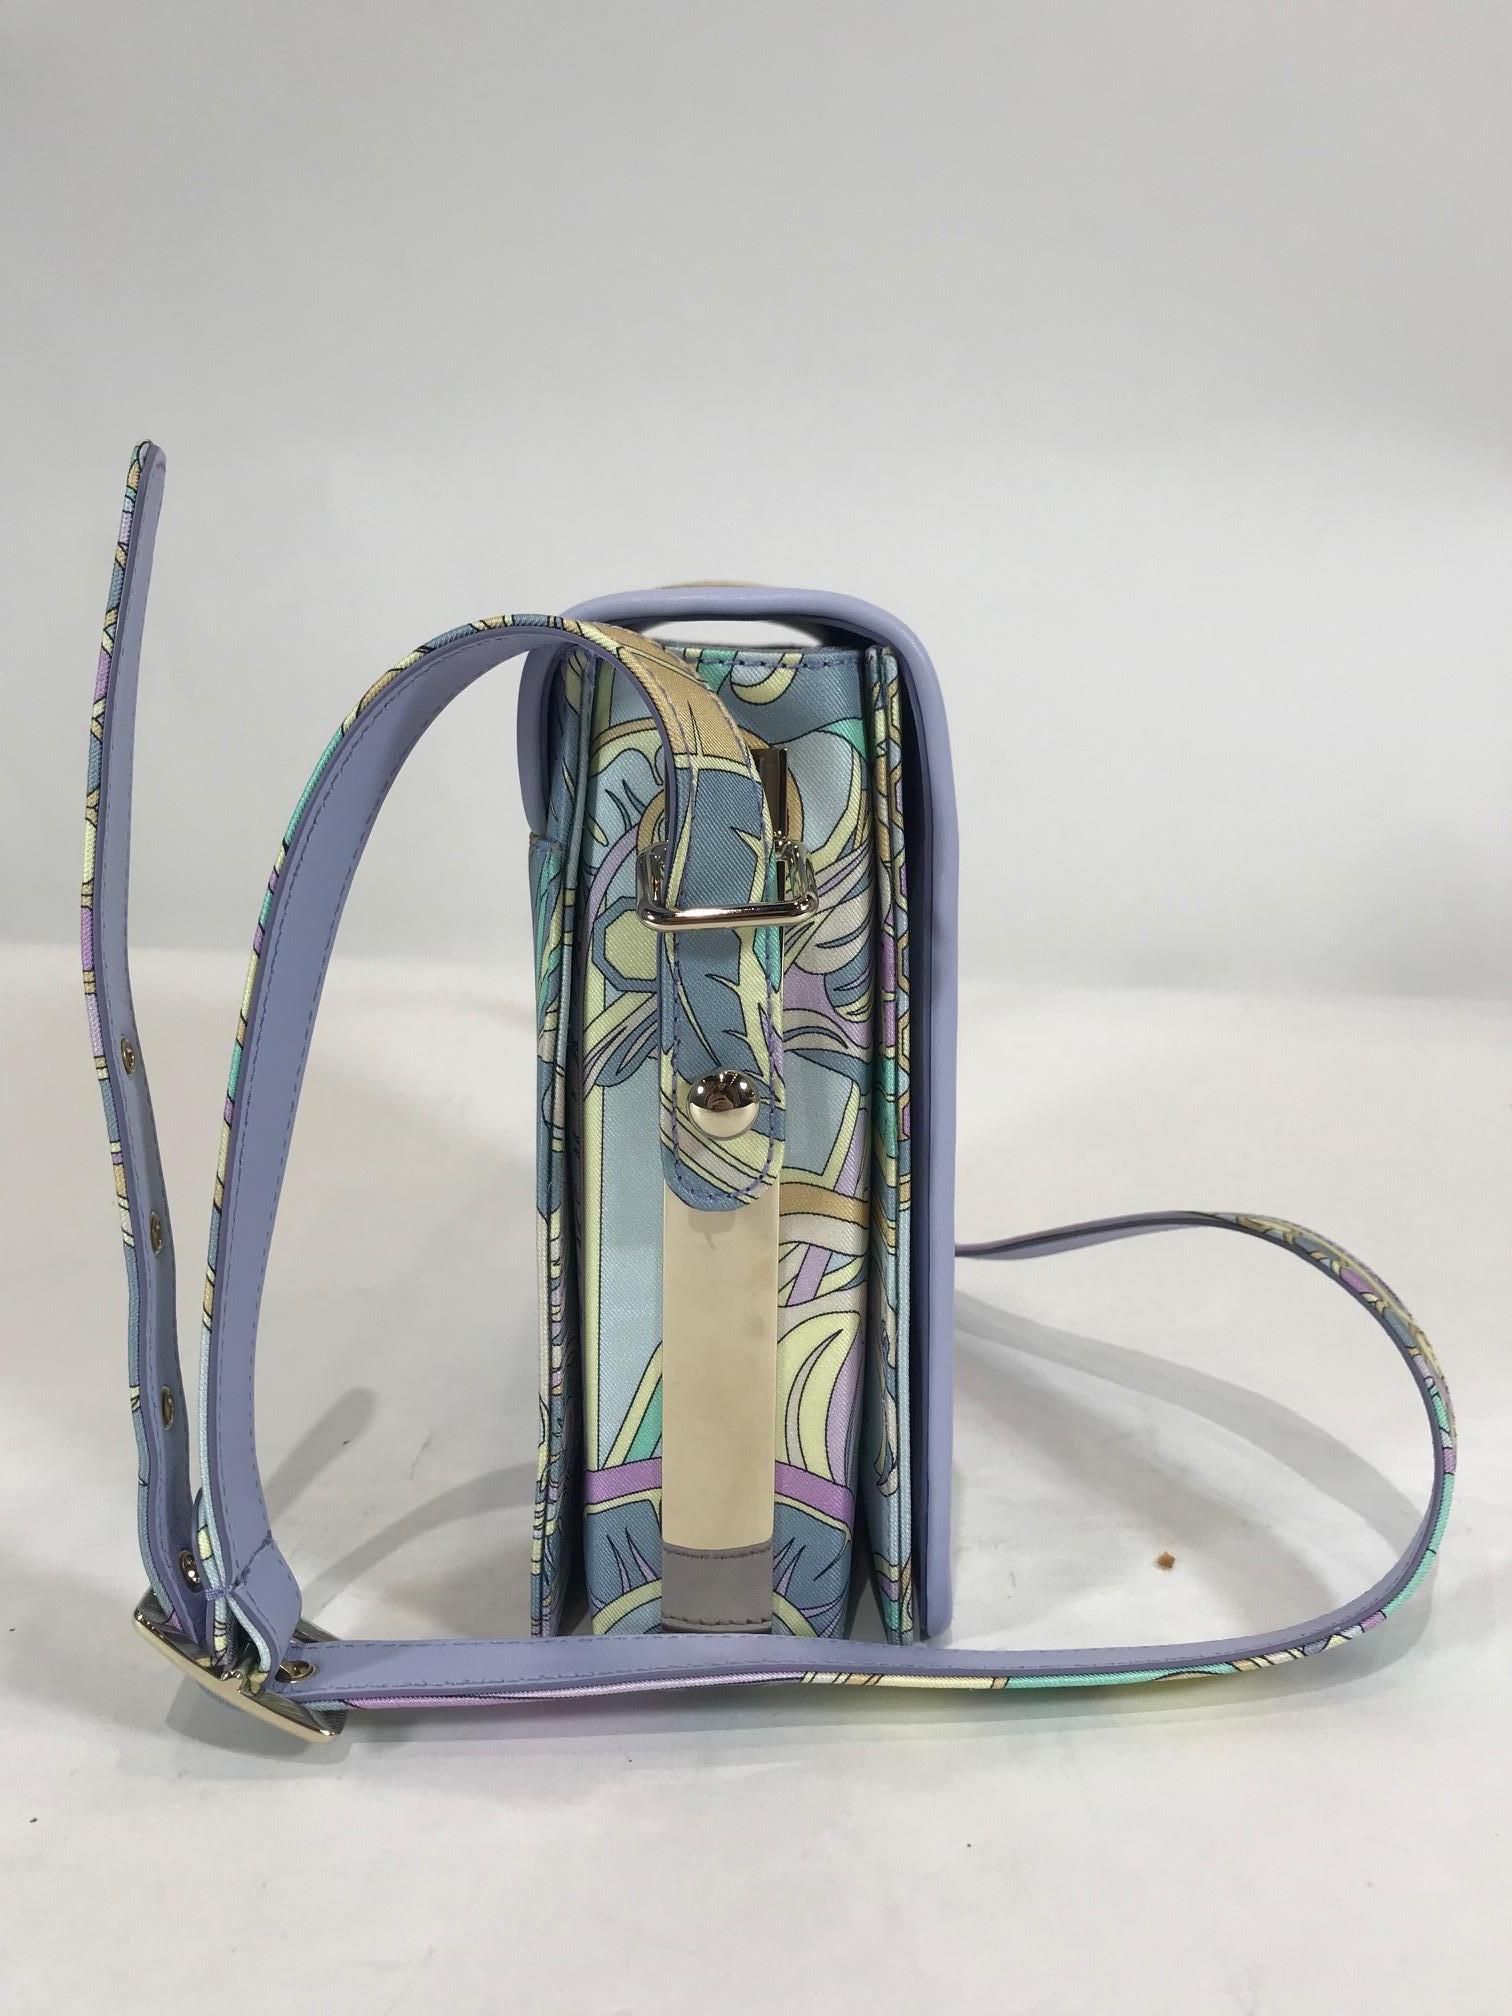 Multicolored pastel silk with classic Pucci abstract pattern. Silver-tone hardware. Front flap closure with magnetic closure. Adjustable shoulder strap. One main interior pocket featuring two slit compartments. One interior slip pocket in main